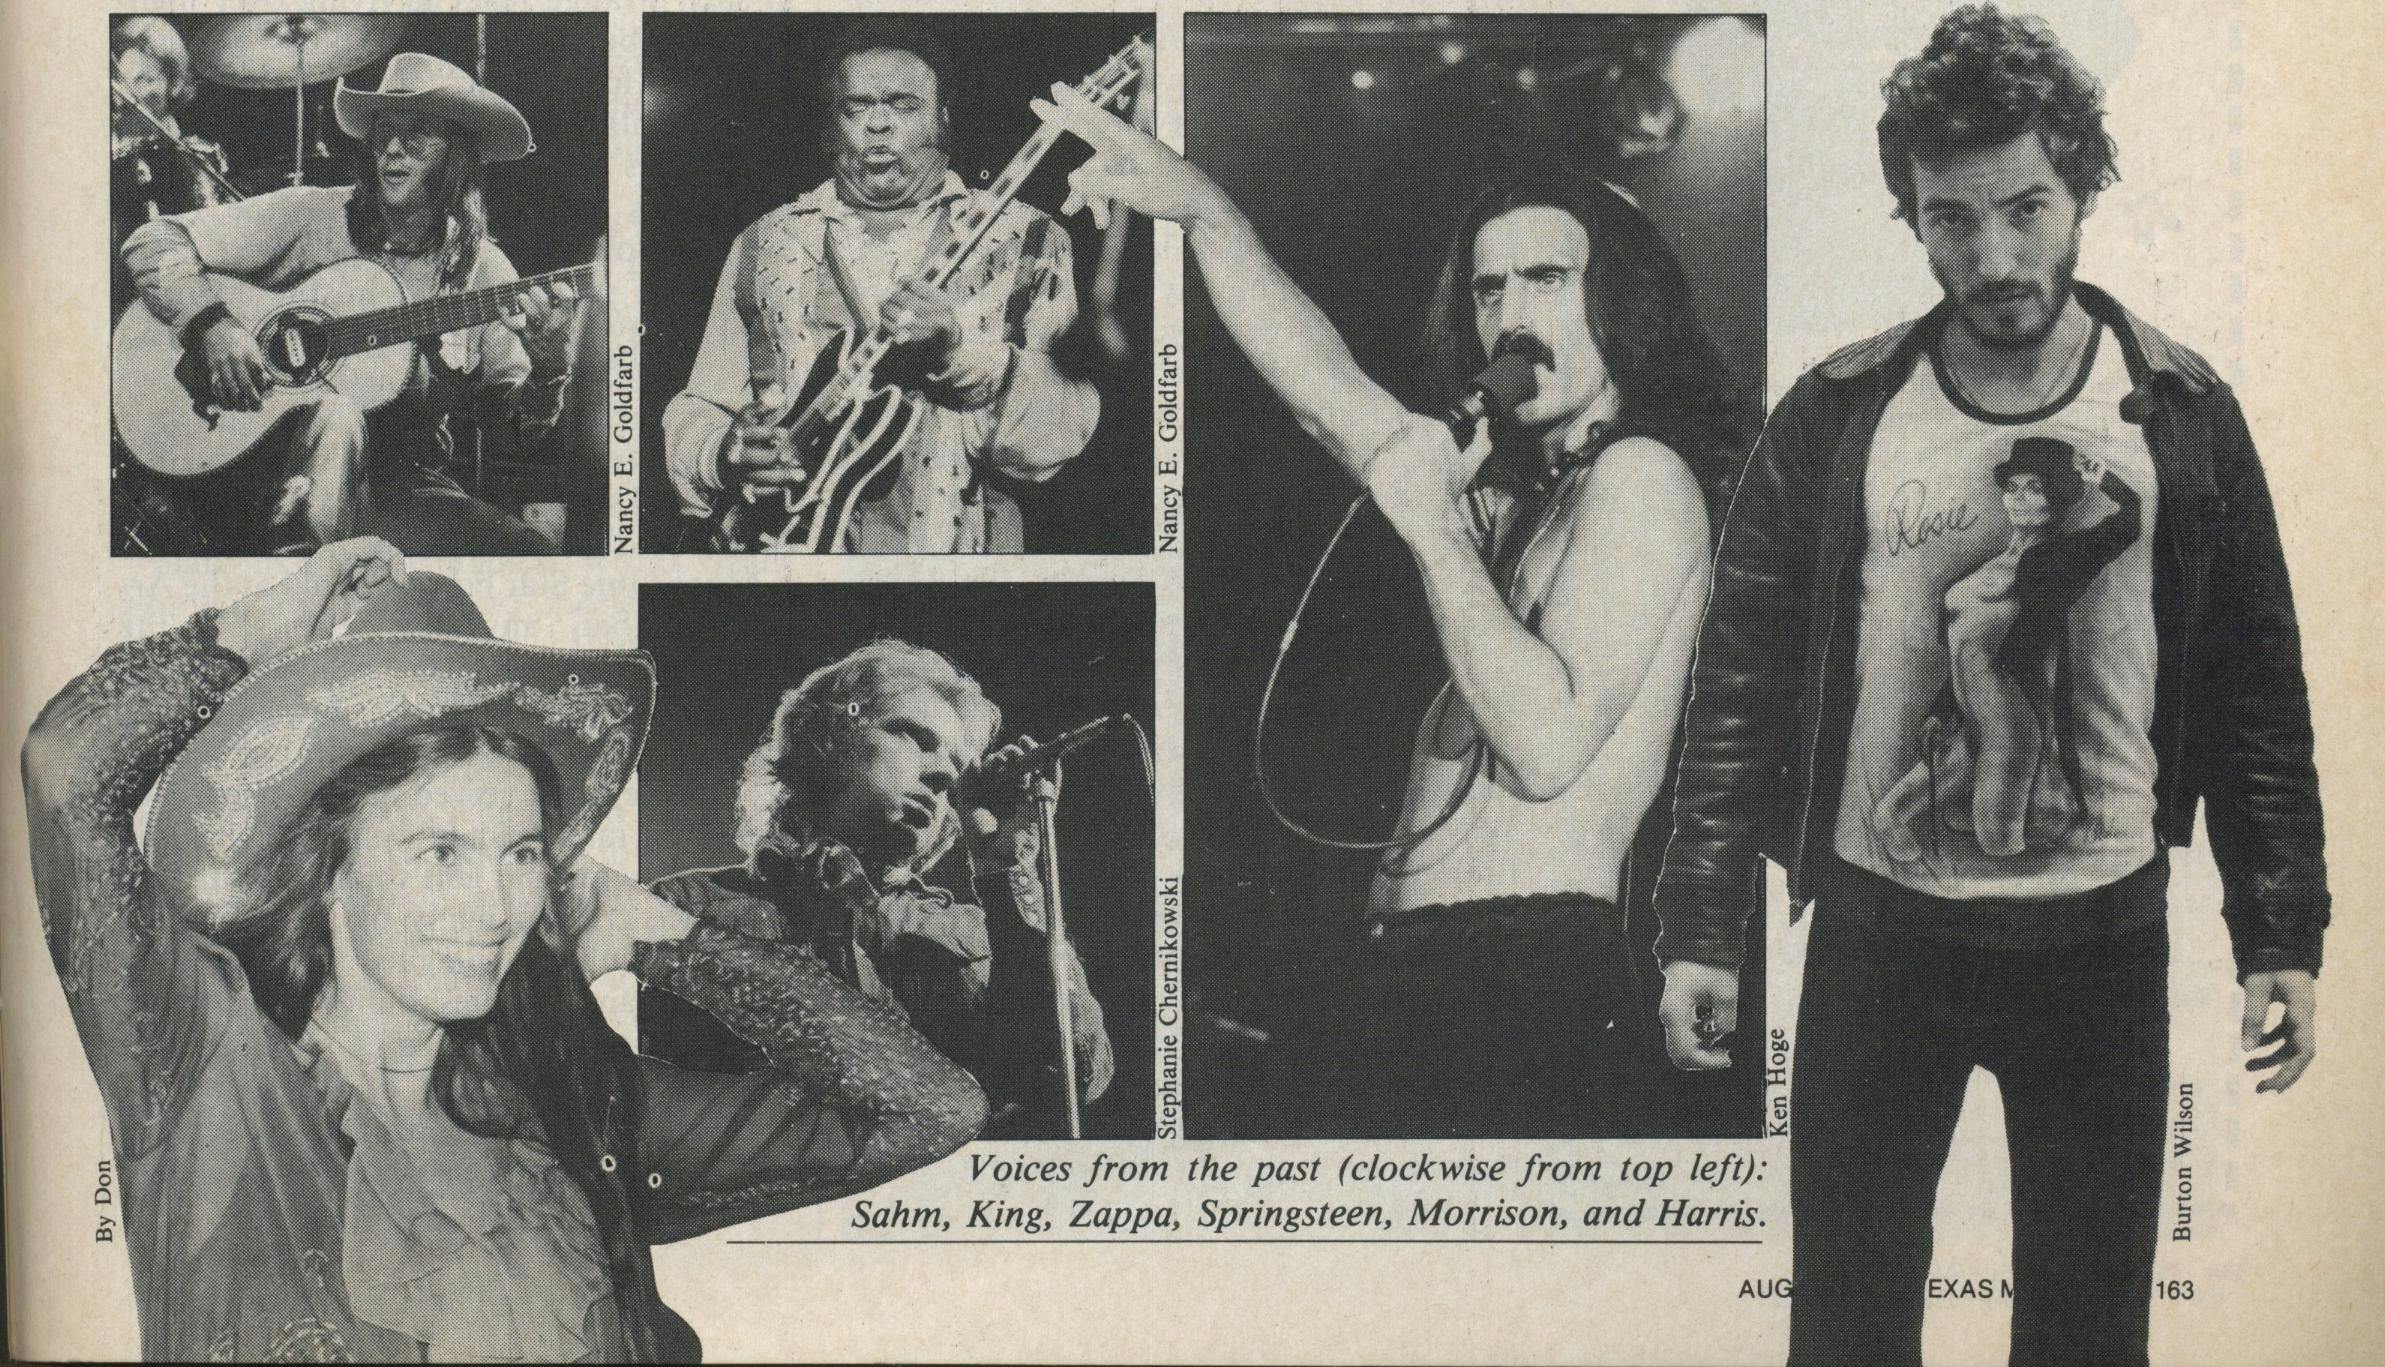 Voices from the past: Sahm, King, Zappa, Springsteen, Morrison, and Harris.